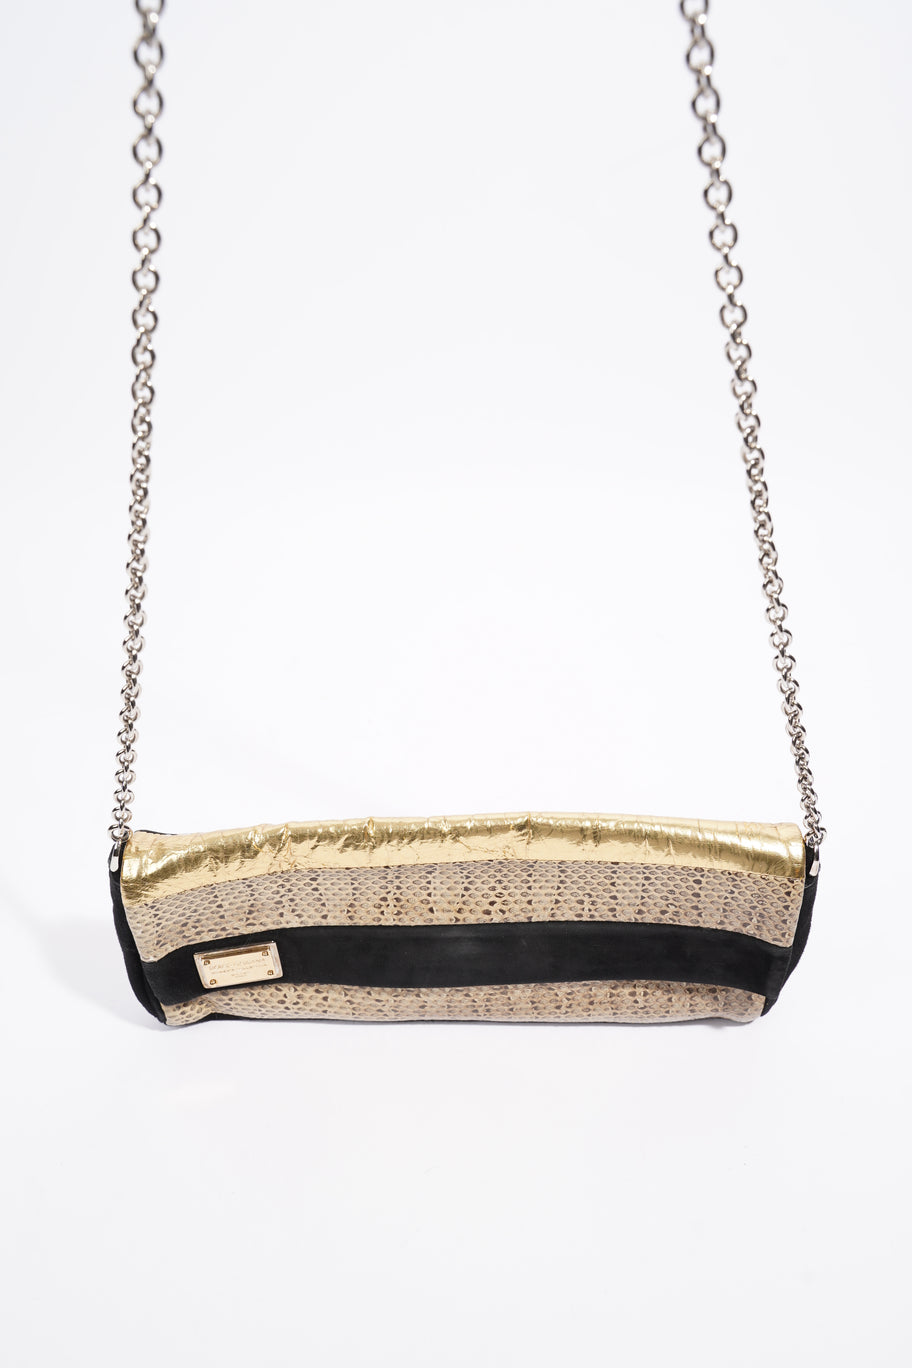 Clutch Bag With Chain Black / Gold Python Image 8